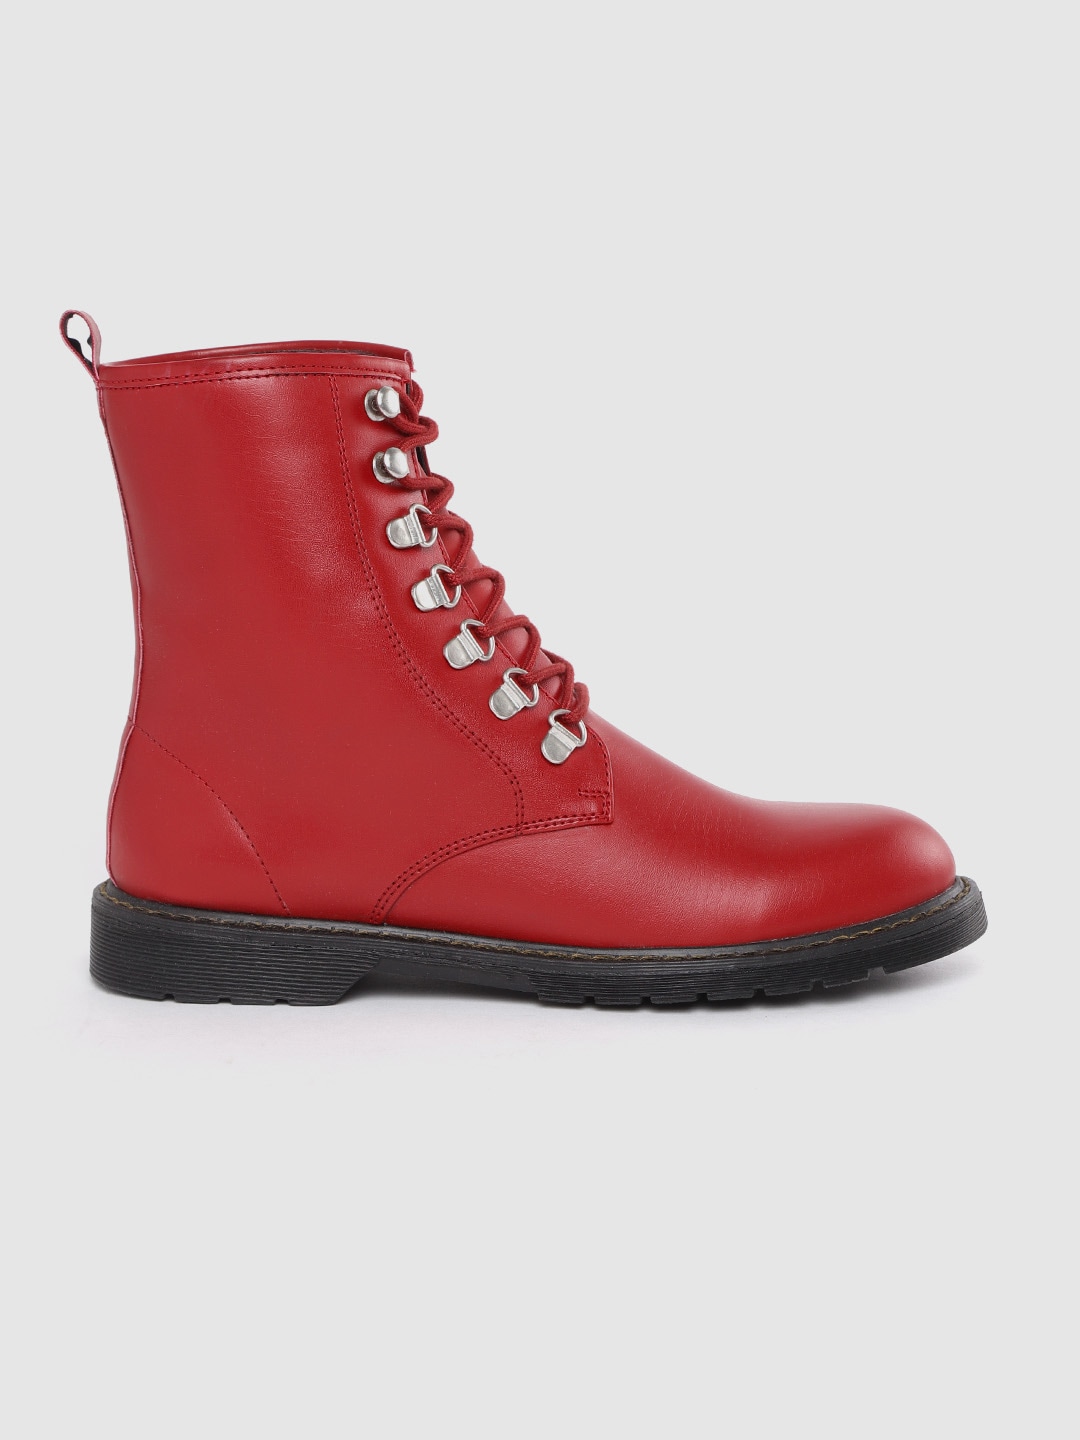 Roadster Women Red Solid High-Top Flat Boots Price in India